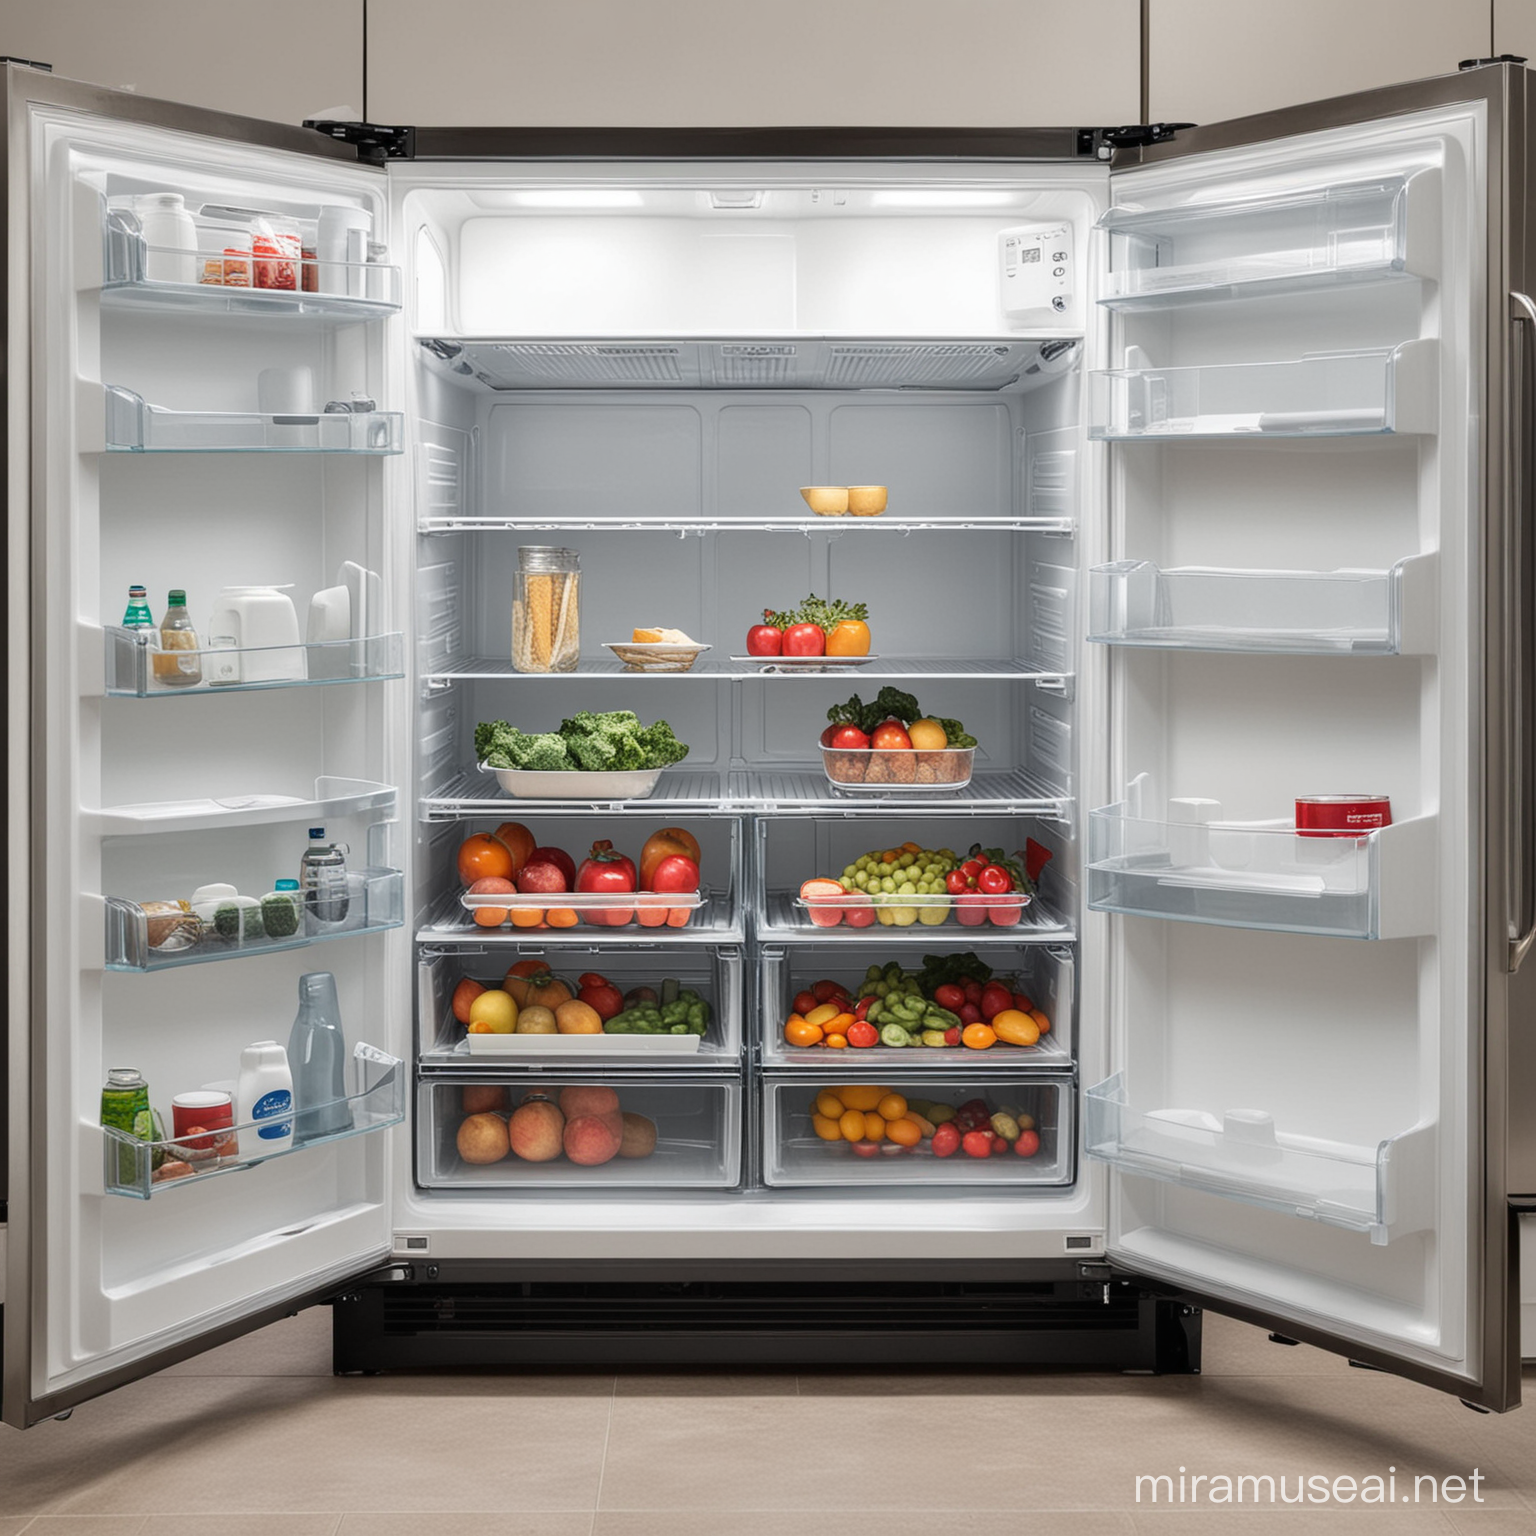 Full View of an Empty Refrigerator Interior